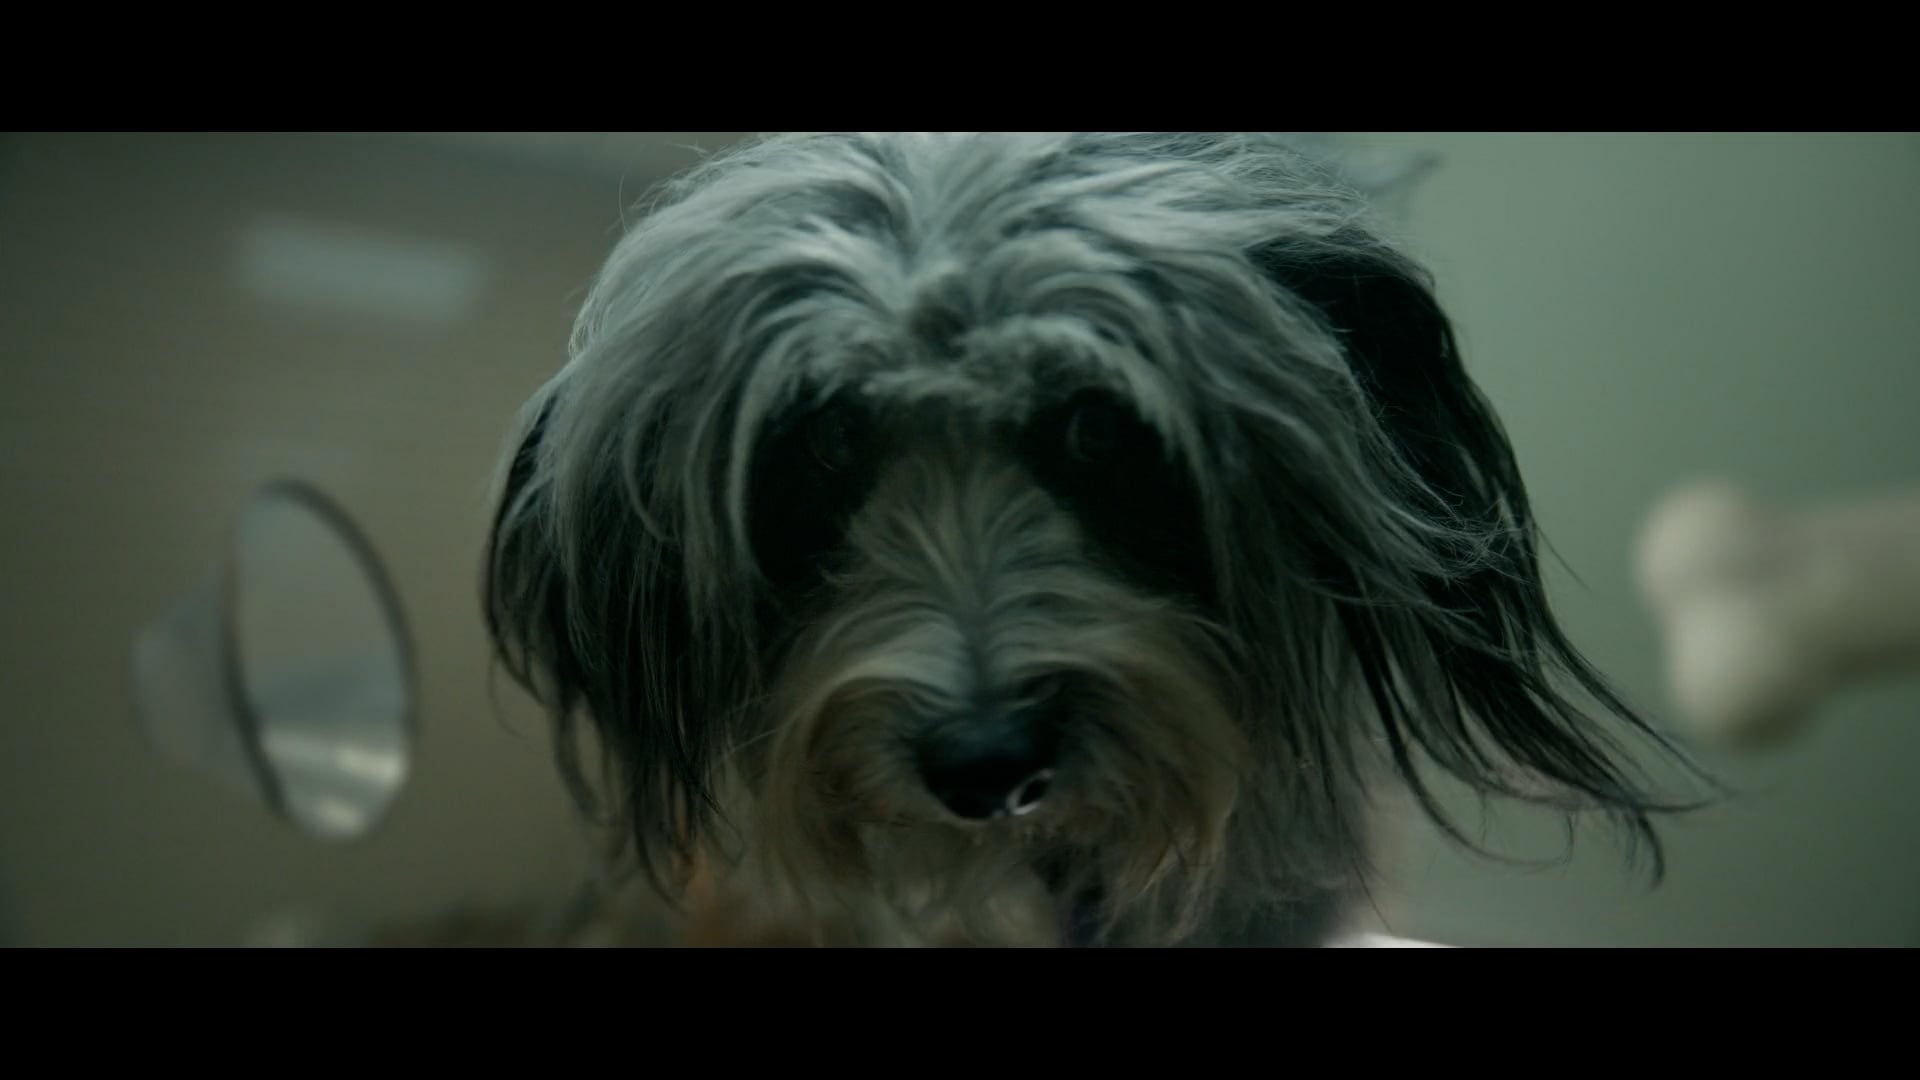 Starling Bank 'Dog Groomer' directed by Cloe Bailly and produced for Caviar